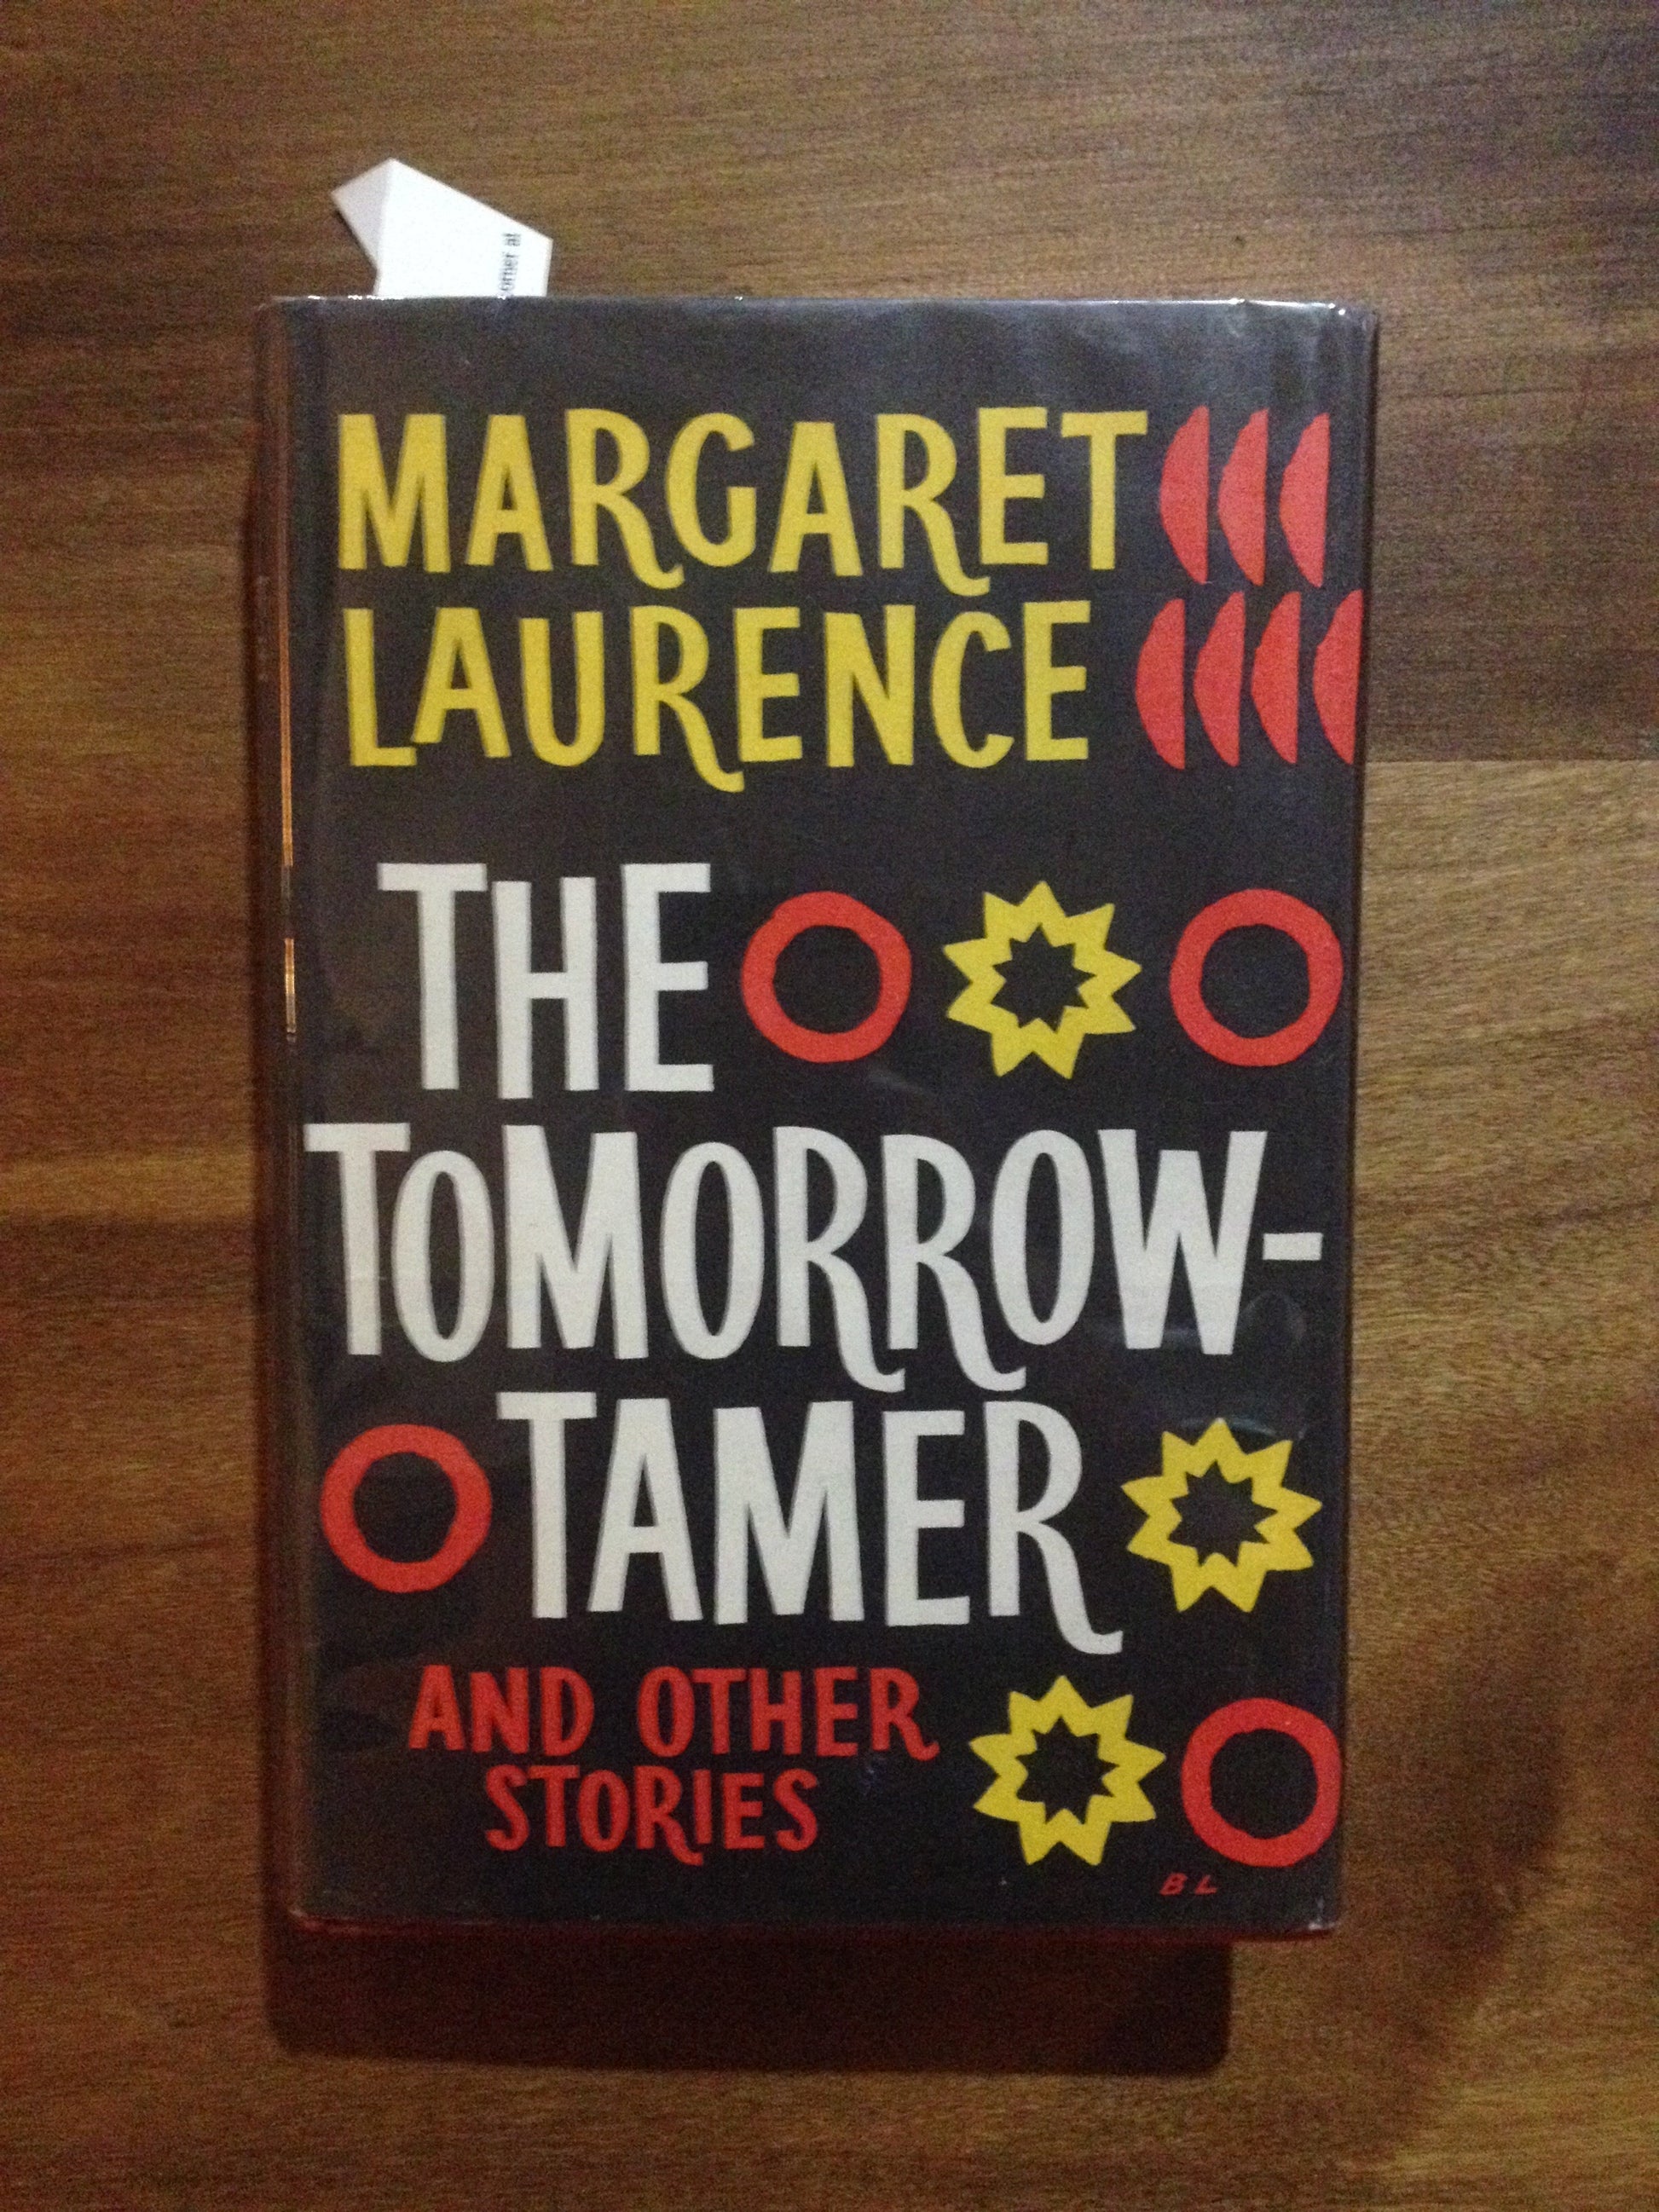 THE TOMORROW-TAMER AND OTHER STORIES BooksCardsNBikes